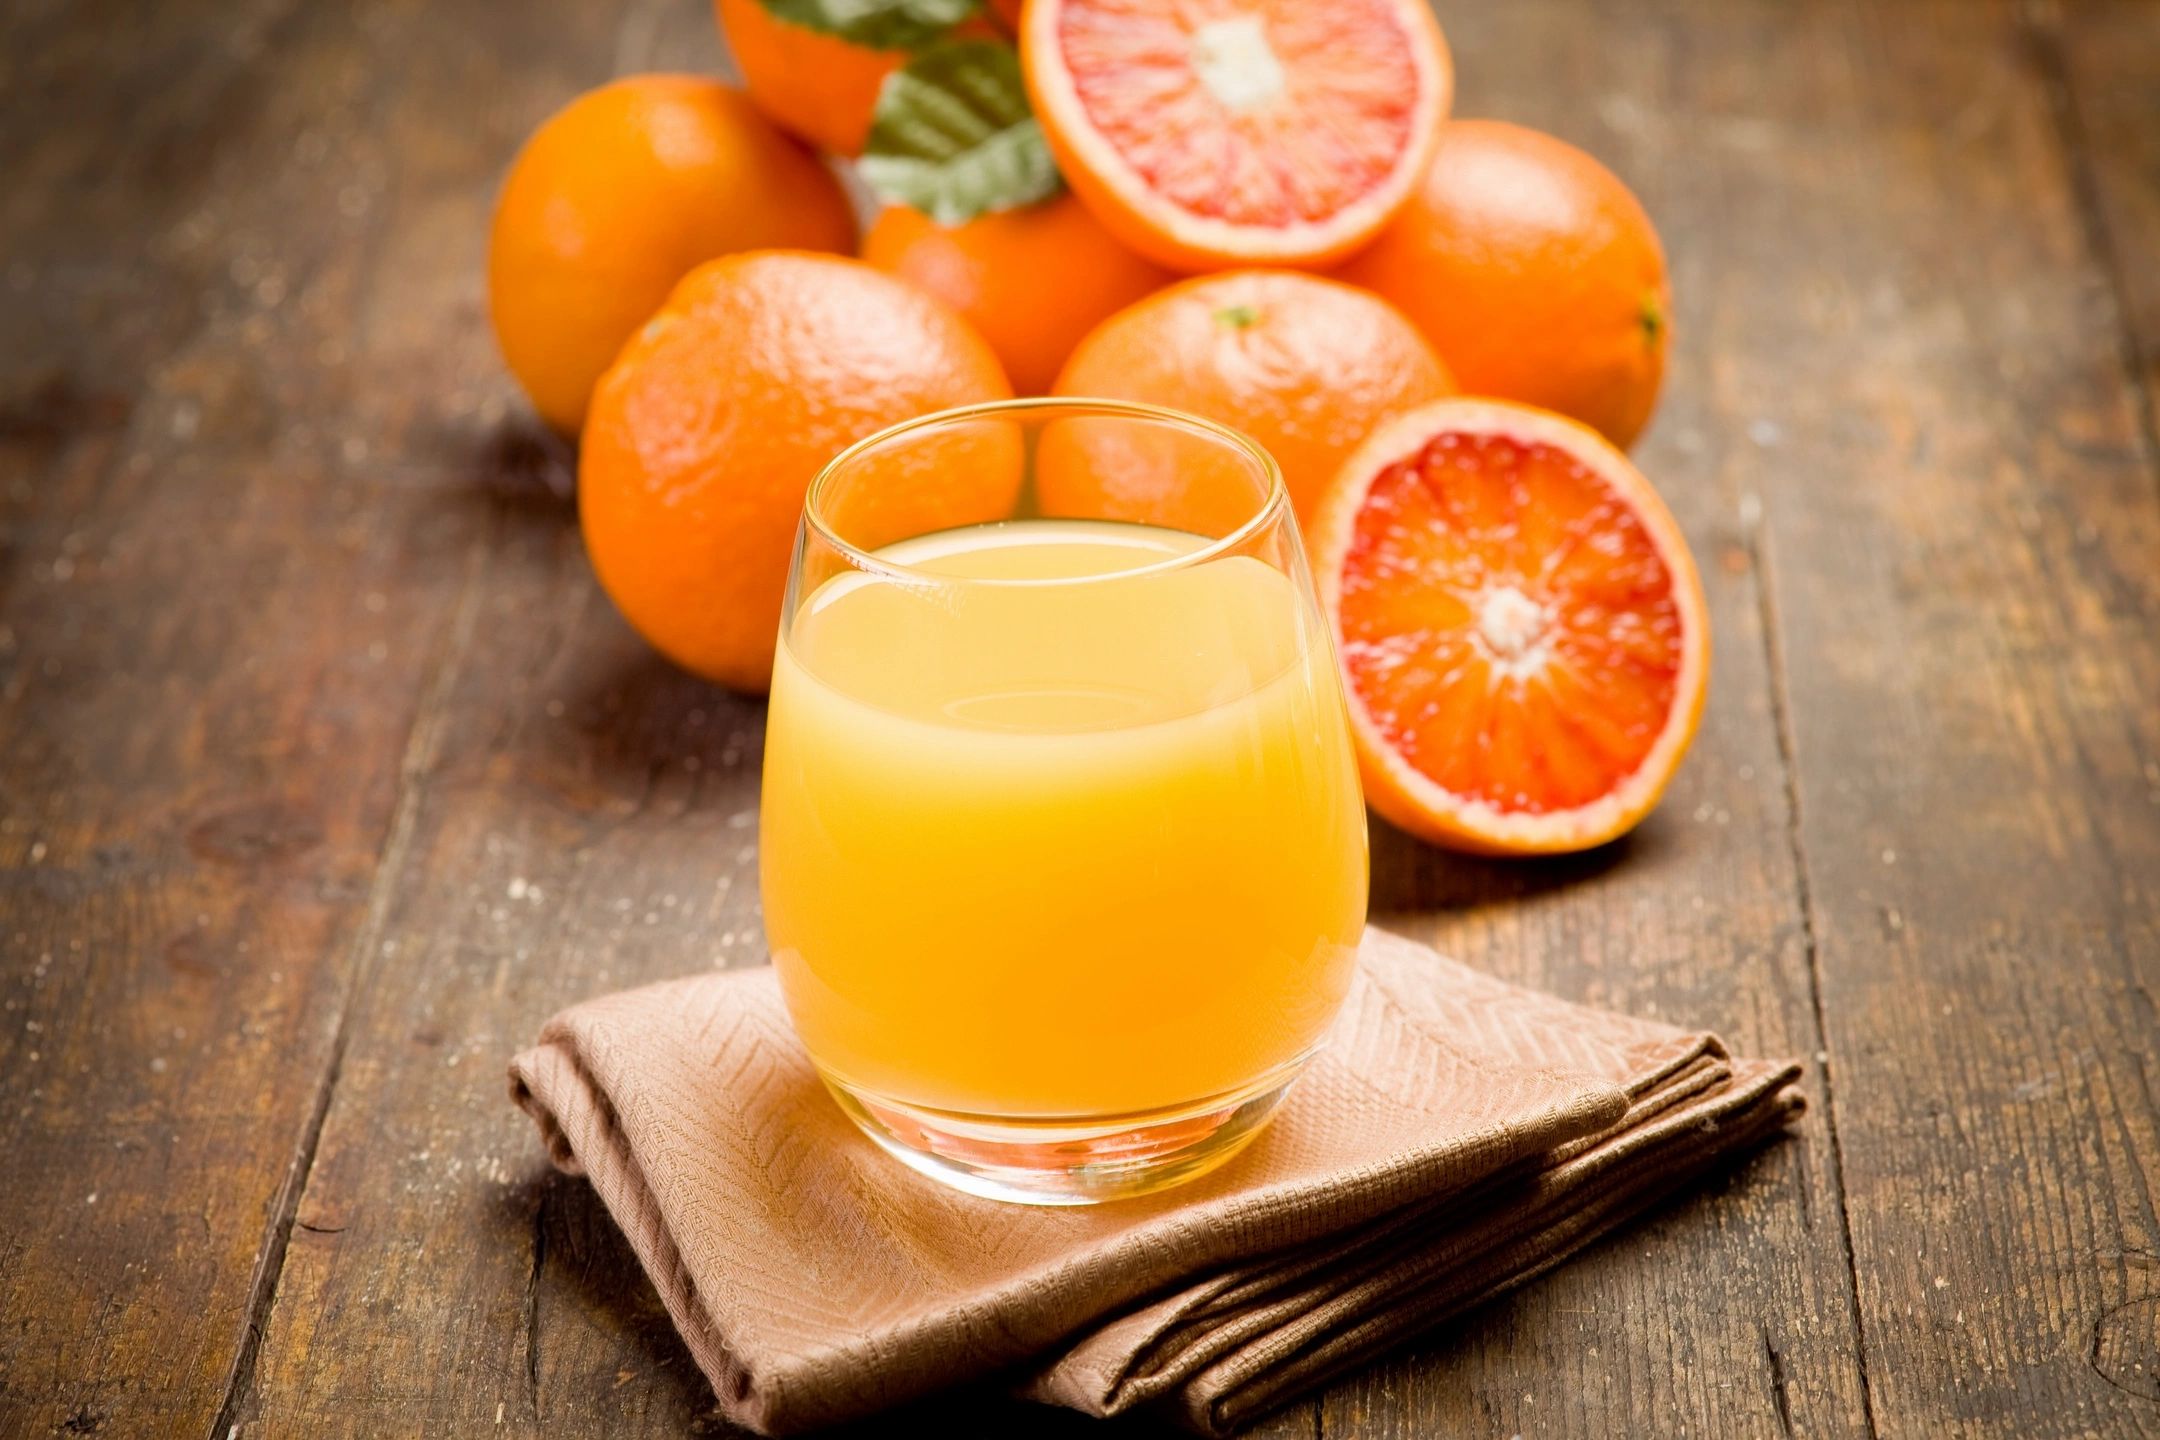 6 Foods That Are High in Vitamin C (and How to Eat Them)